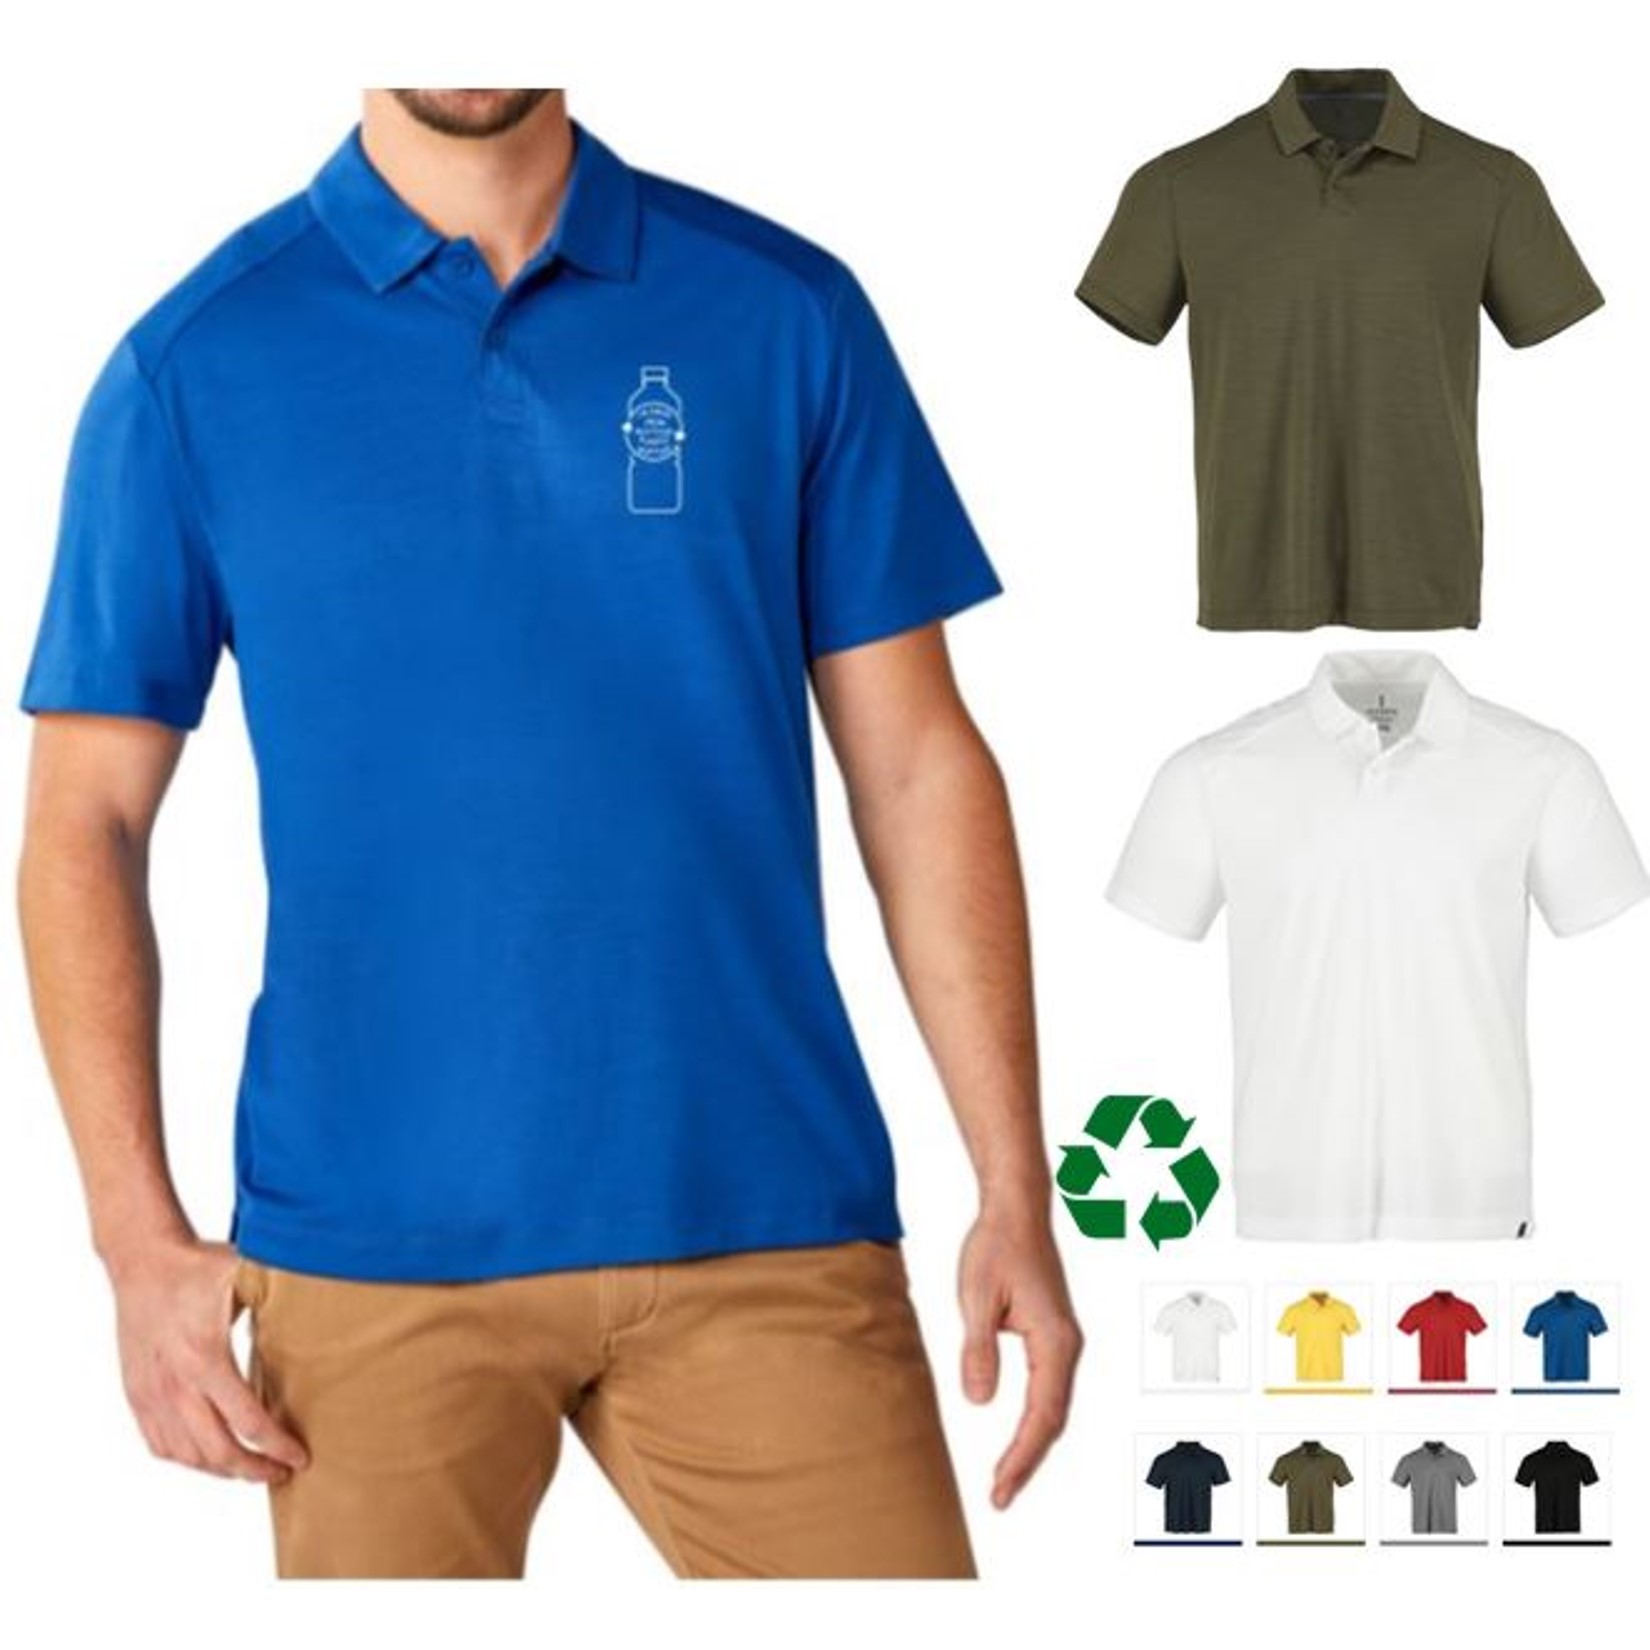 Unisex Great Fit Eco Polo | Recycled Branded Sustainable Polo